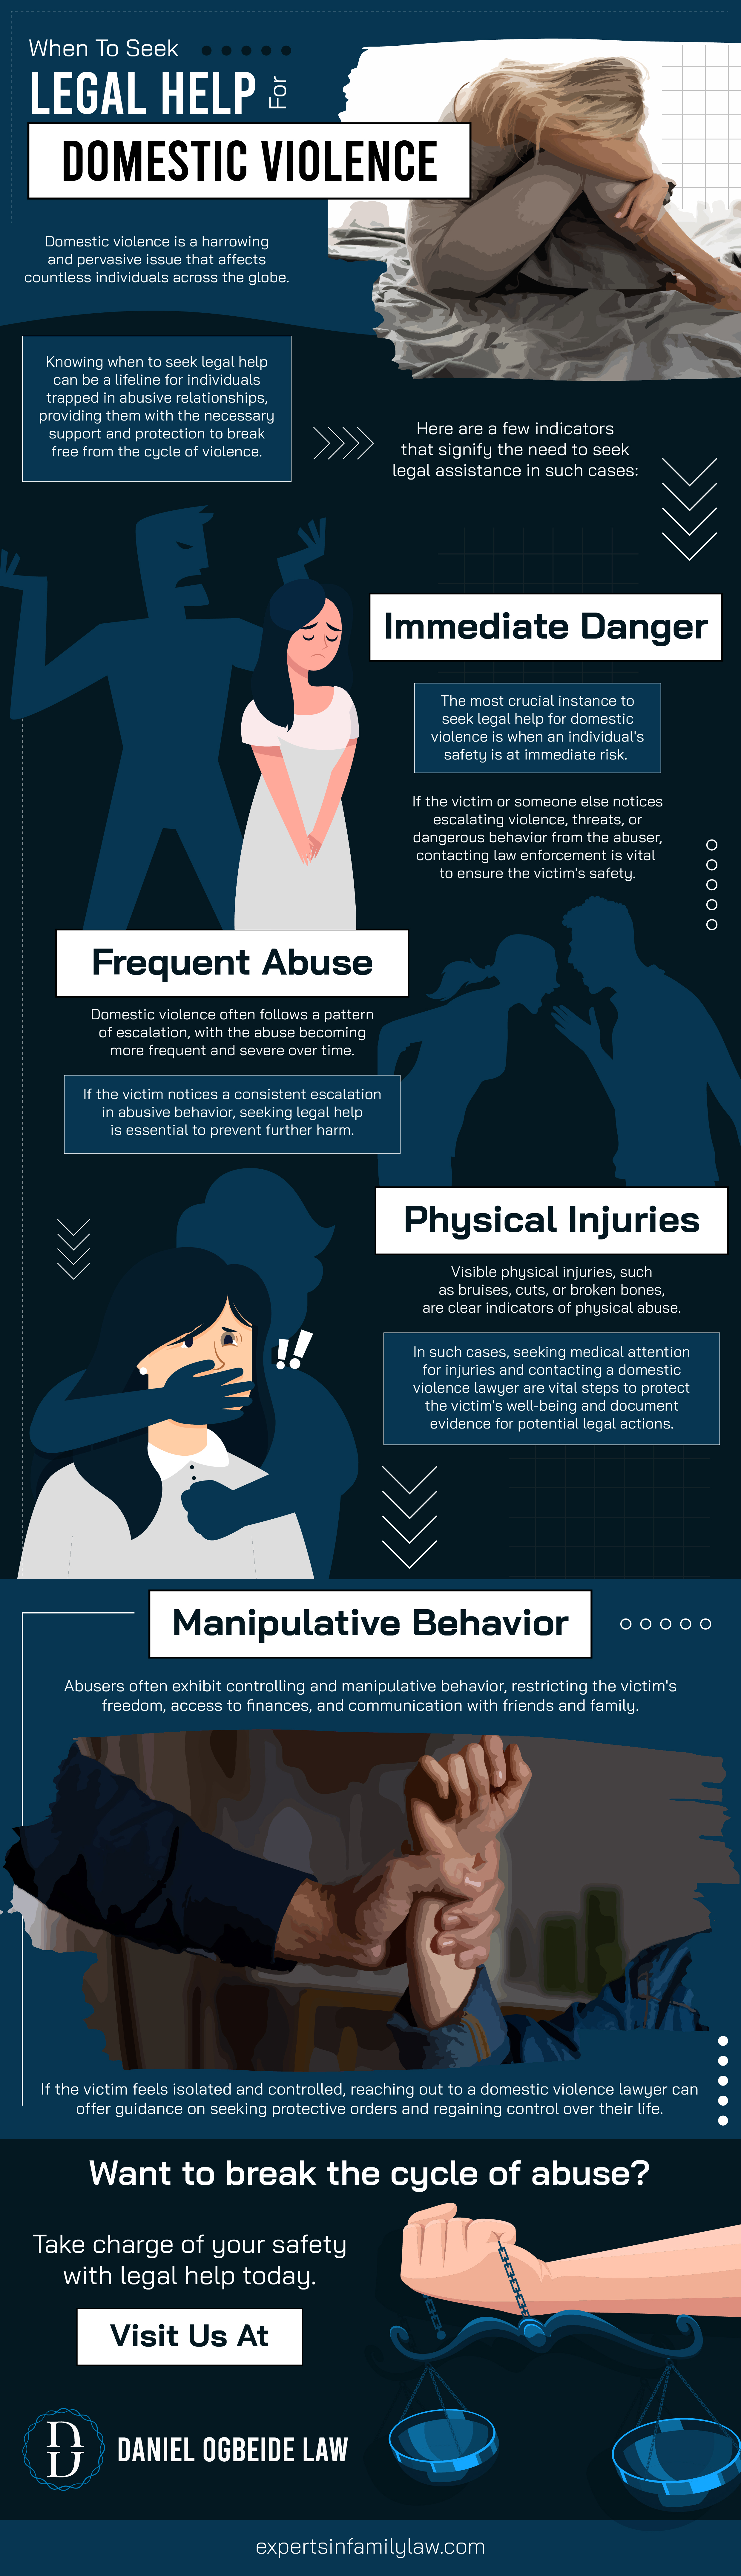 Legal Help For Domestic Violence - Infograph